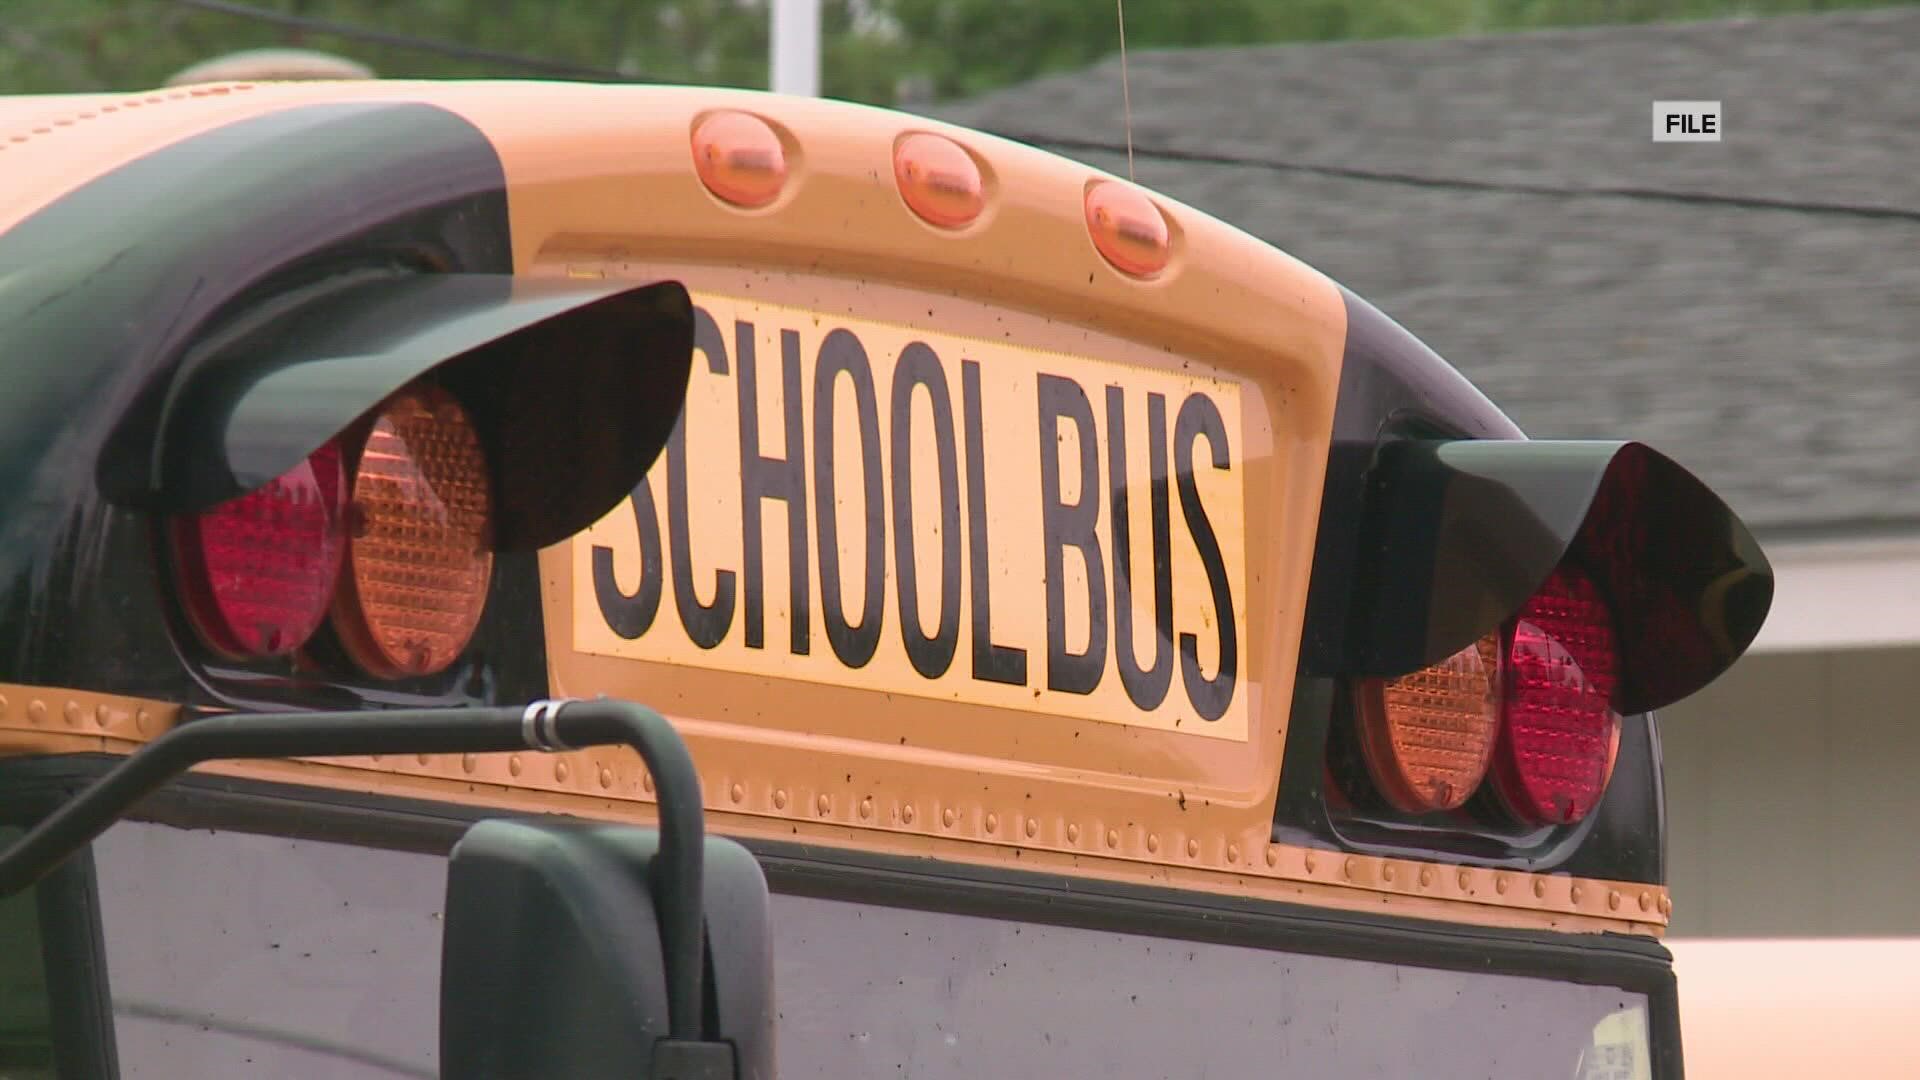 Students in one Maine school district will have to find their own ride to school this week.